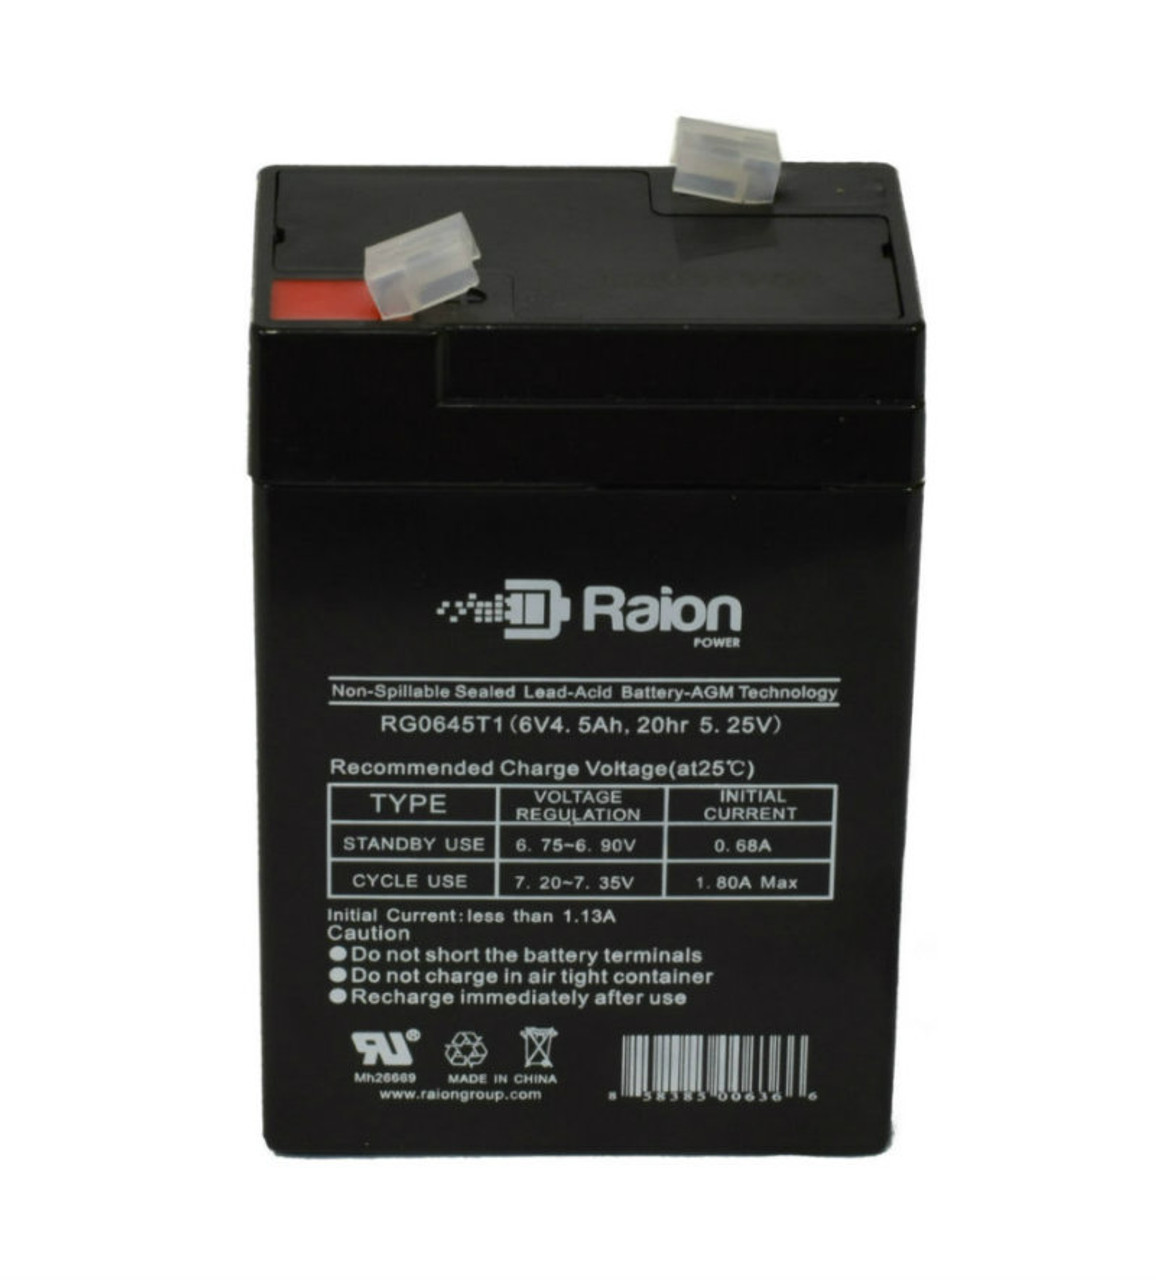 Raion Power RG0645T1 Replacement Battery Cartridge for Light CE1-5AA